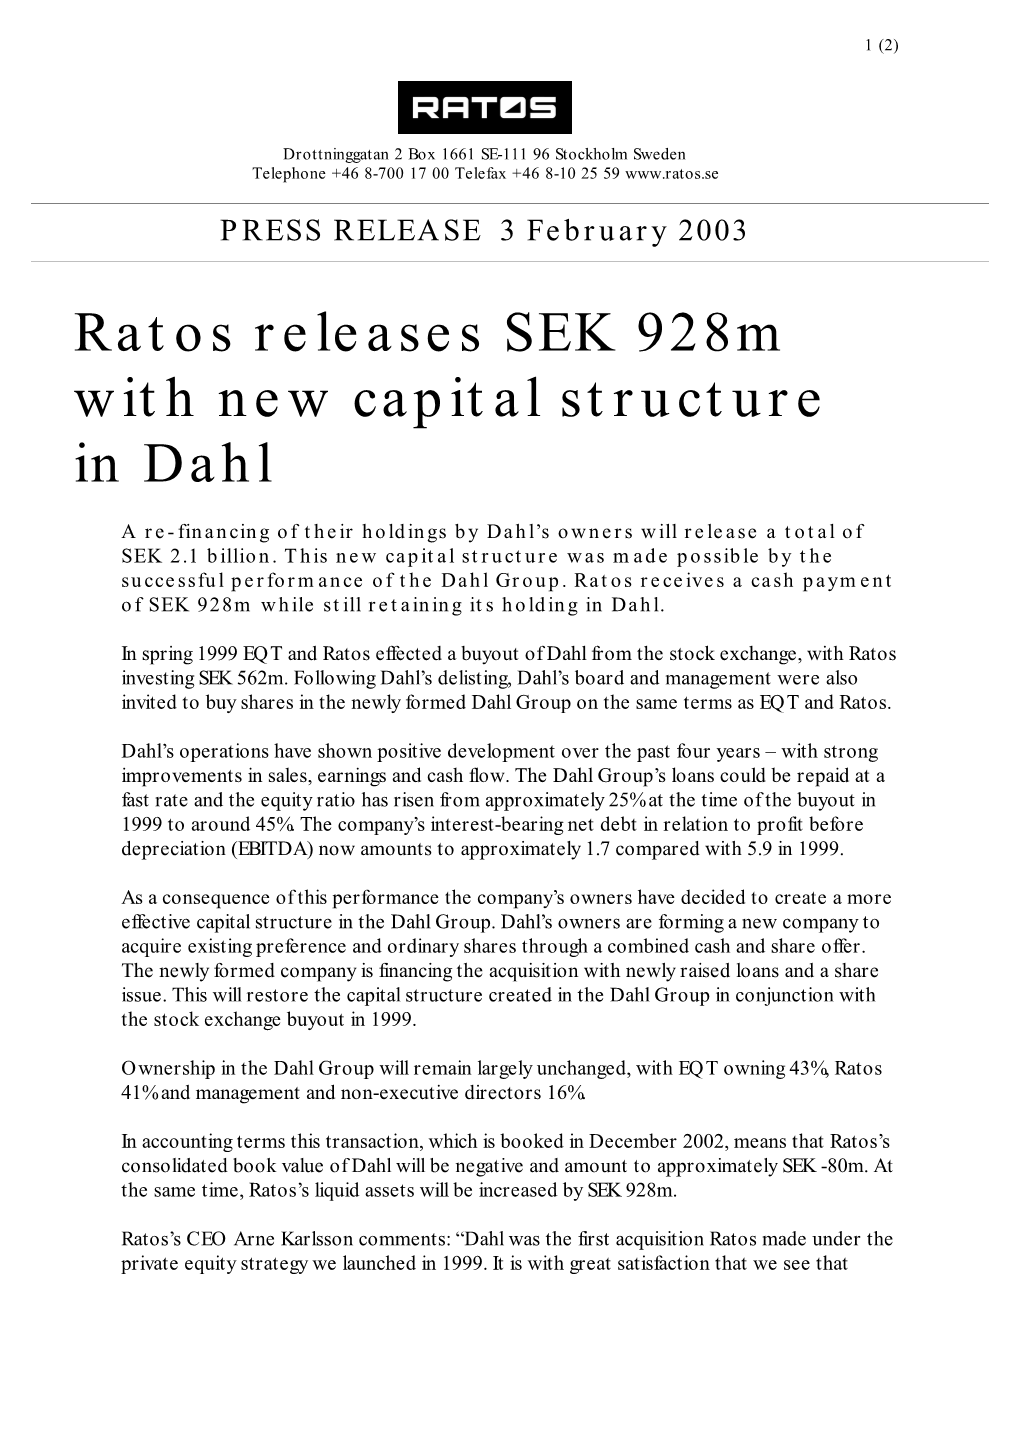 Ratos Releases SEK 928M with New Capital Structure in Dahl